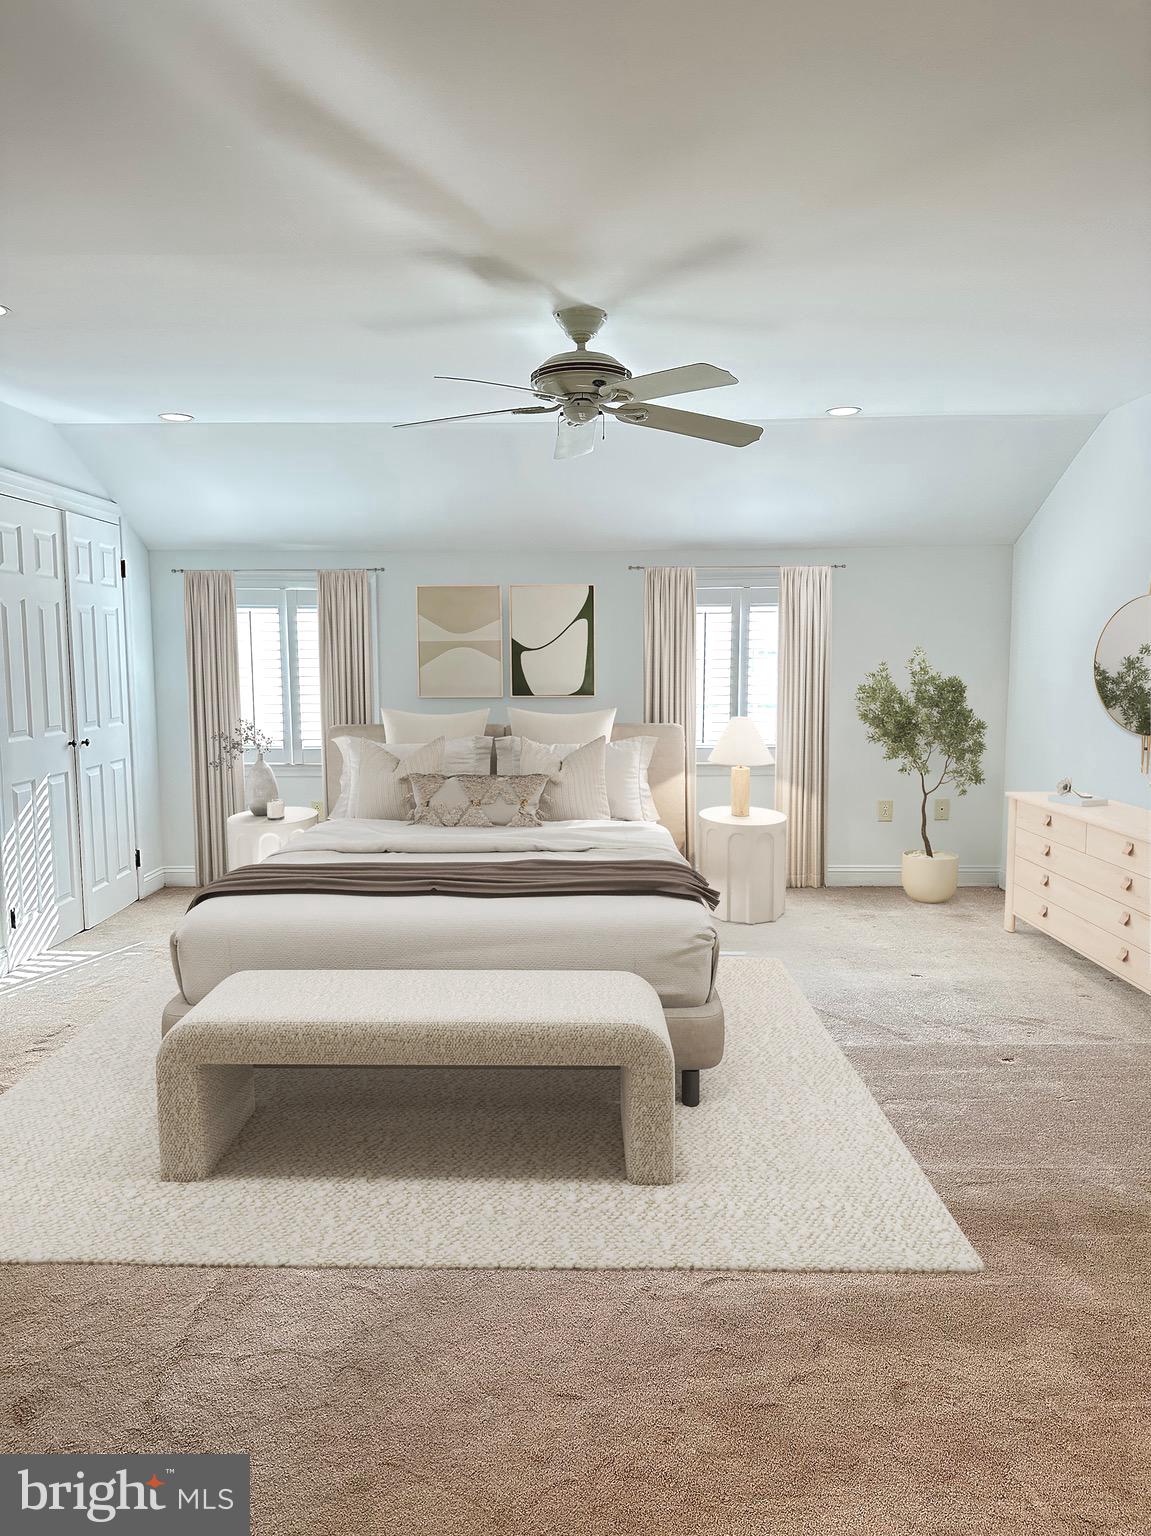 a spacious bedroom with a large bed and ceiling fan